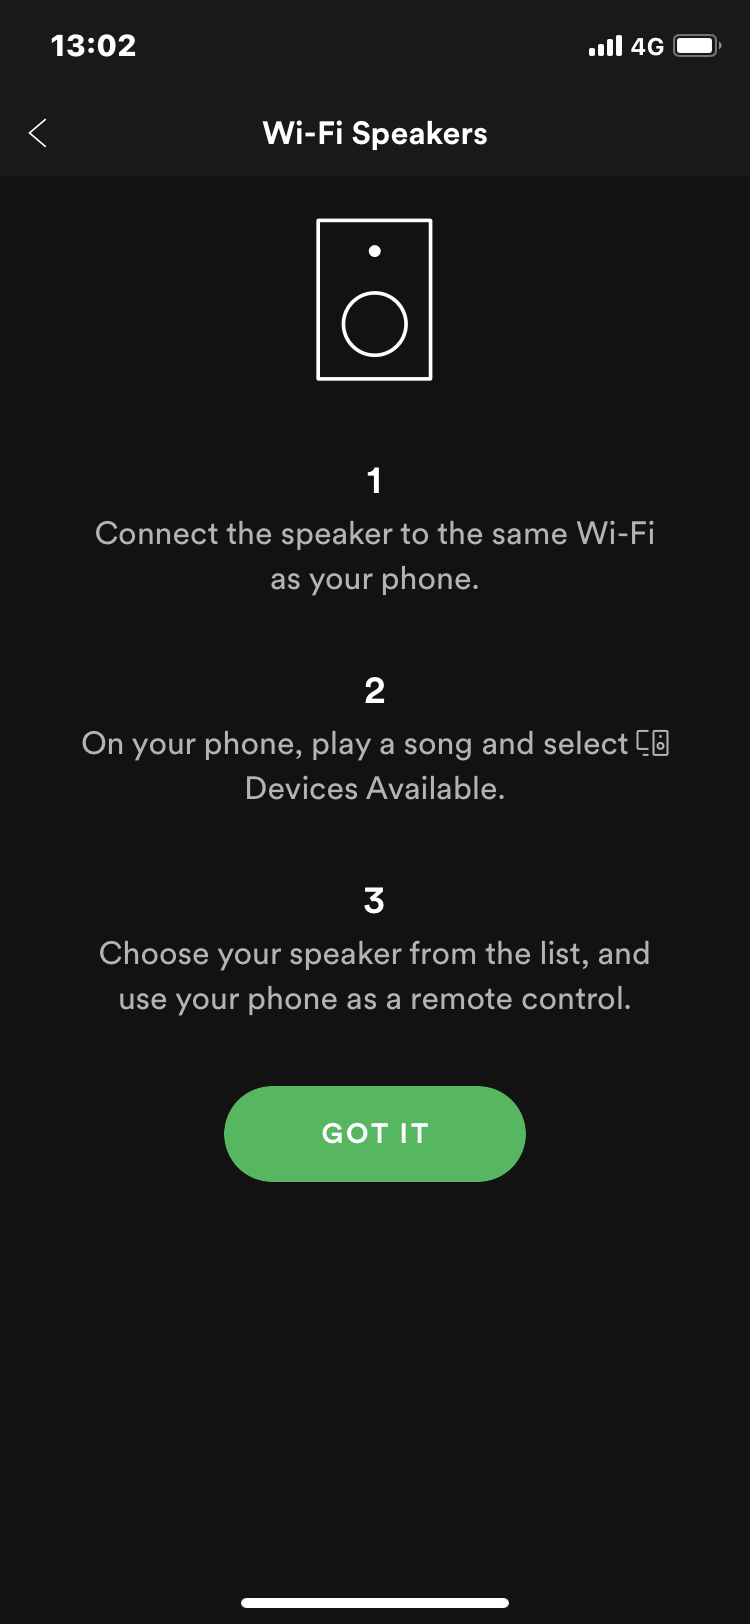 dyr Hollywood nøgen sonos not showing up in spotify connect | Sonos Community